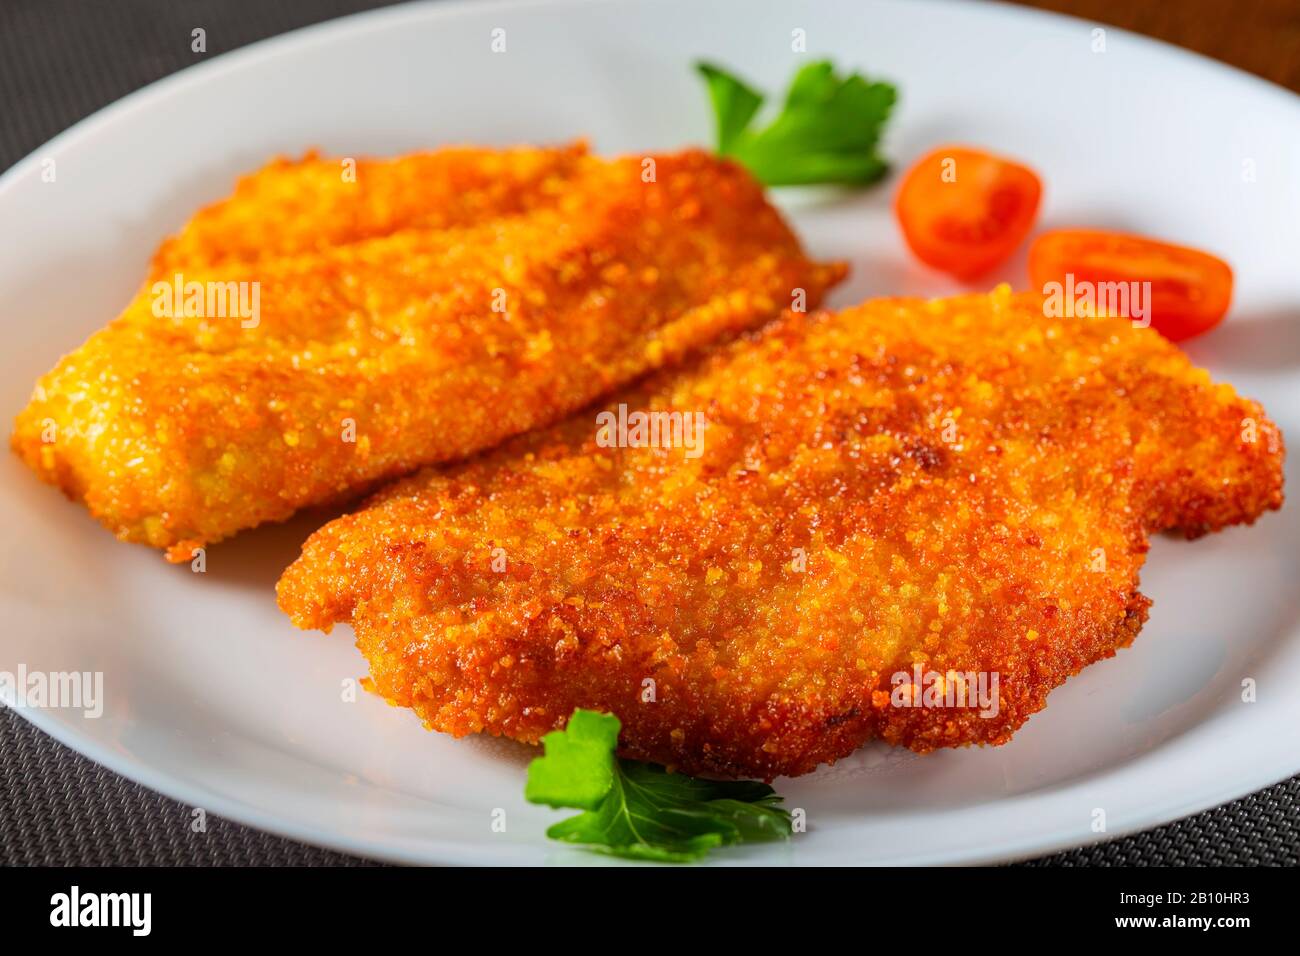 Chicken schnitzel on plate with herbs Stock Photo